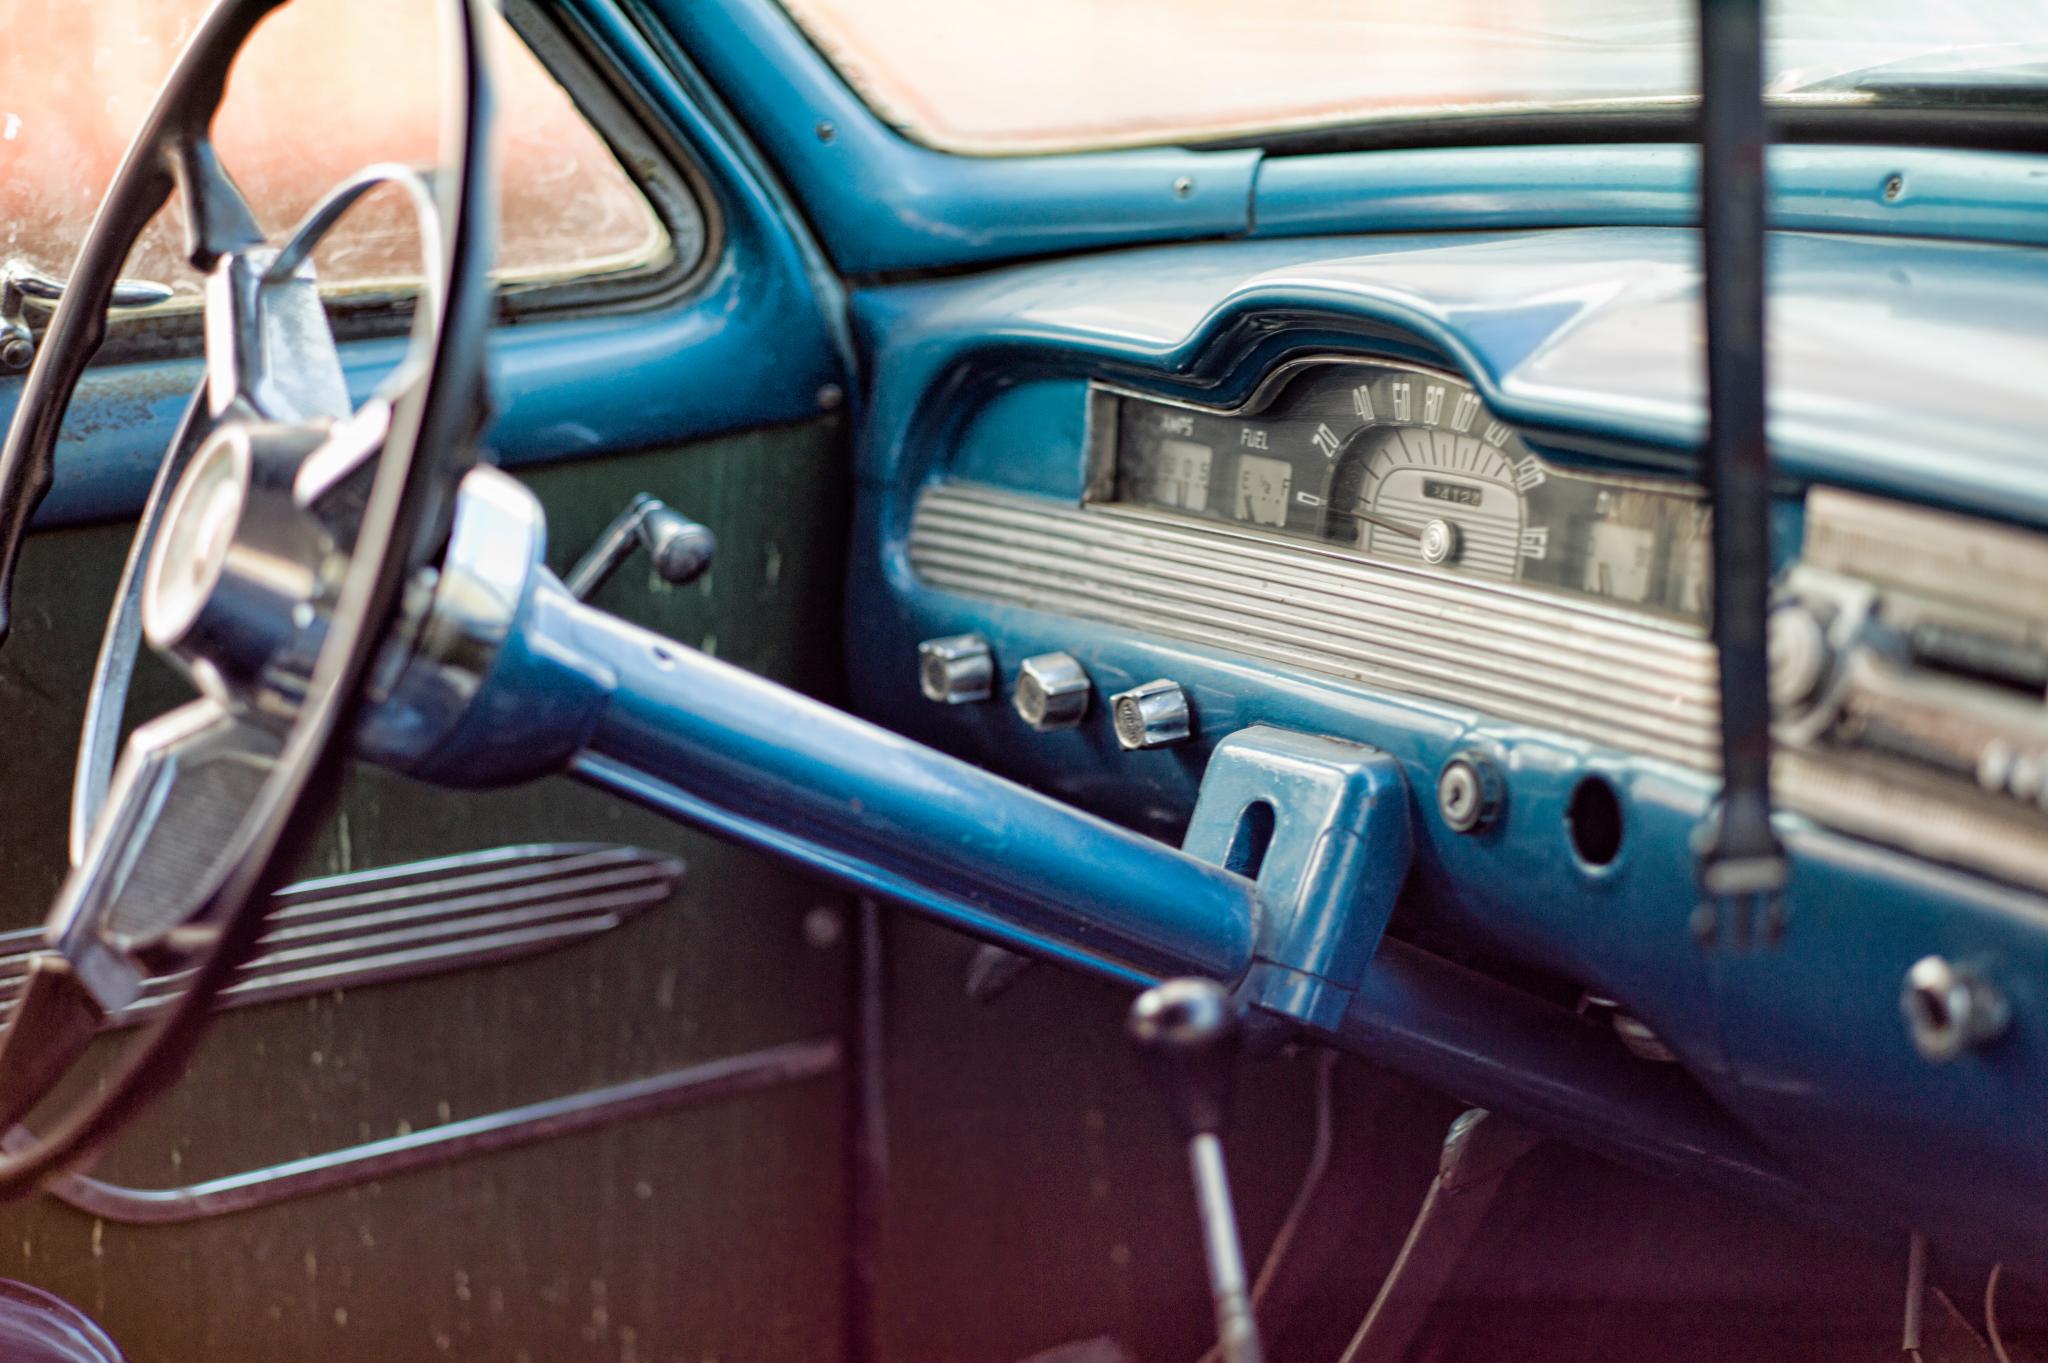 a blue car with an analog clock in the dashboard